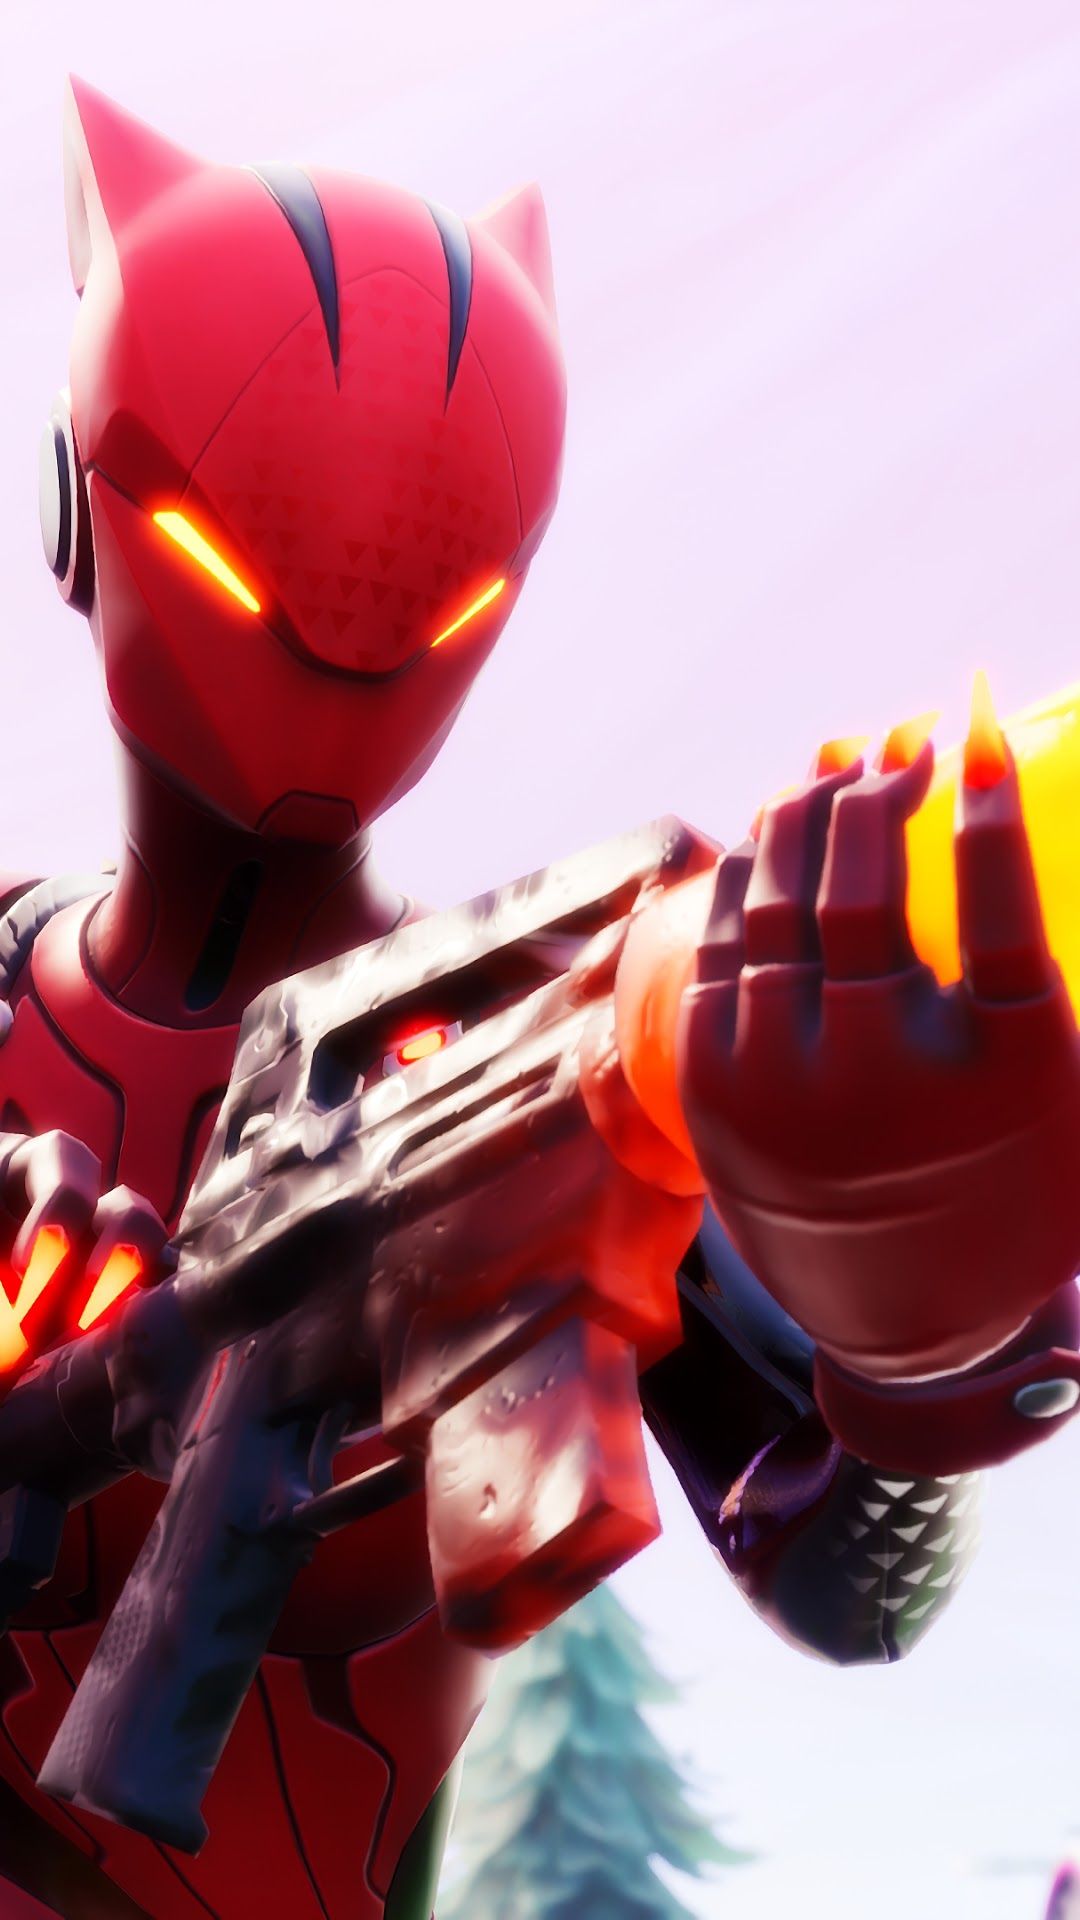 Red Fortnite character with a yellow and black gun - Fortnite